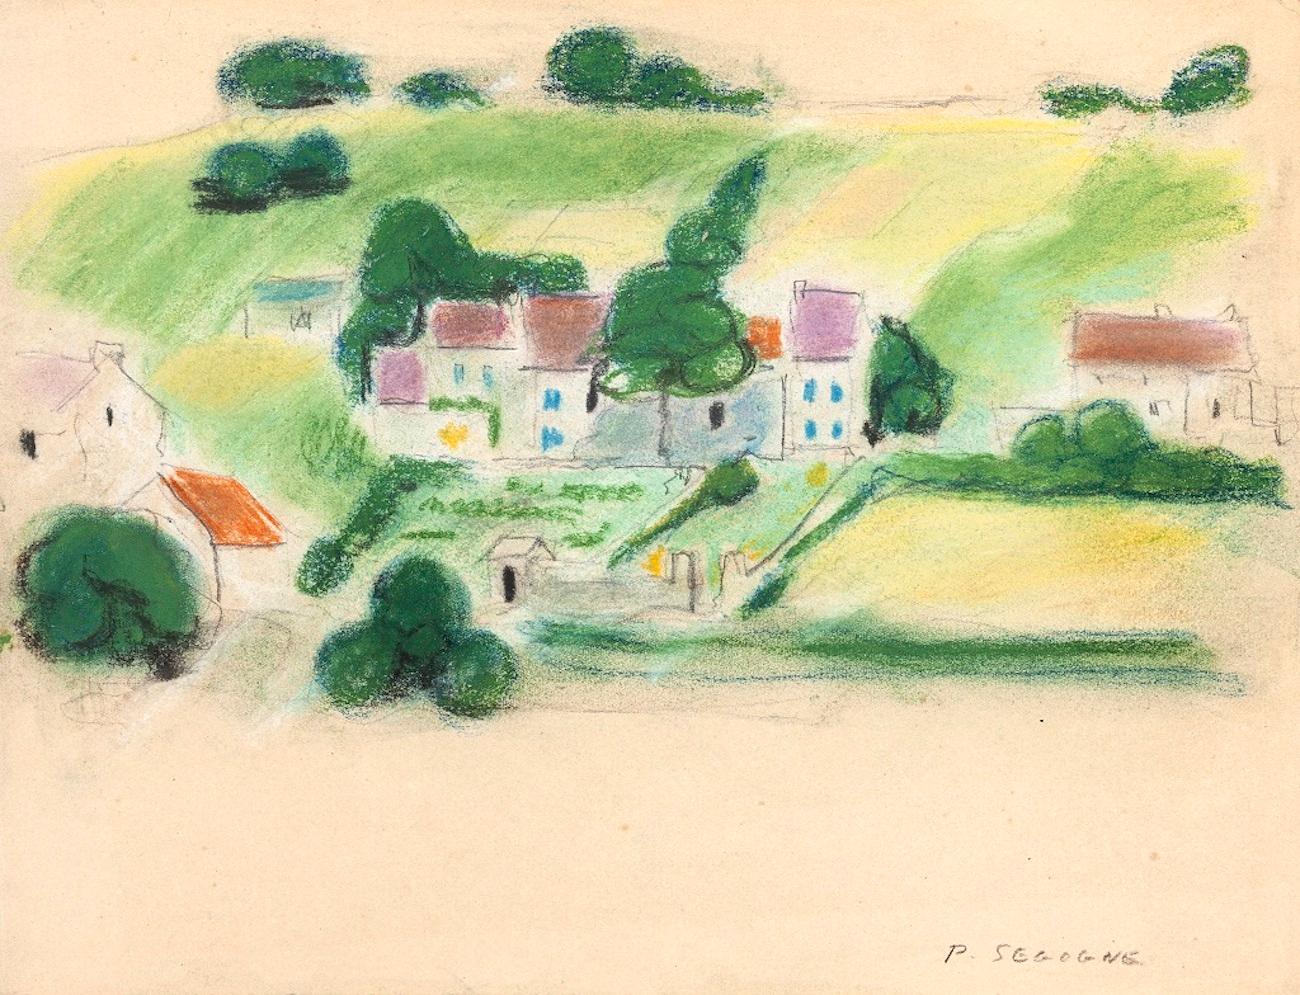 Countryside with Farmhouses is an original artwork, realized by Pierre Segogne in the 1950s.

Hand-signed on the lower right margin in pencil by the artist: P. Segogne.

Mixed colored pastel on paper.

Excellent conditions.

Fresh and beautiful work